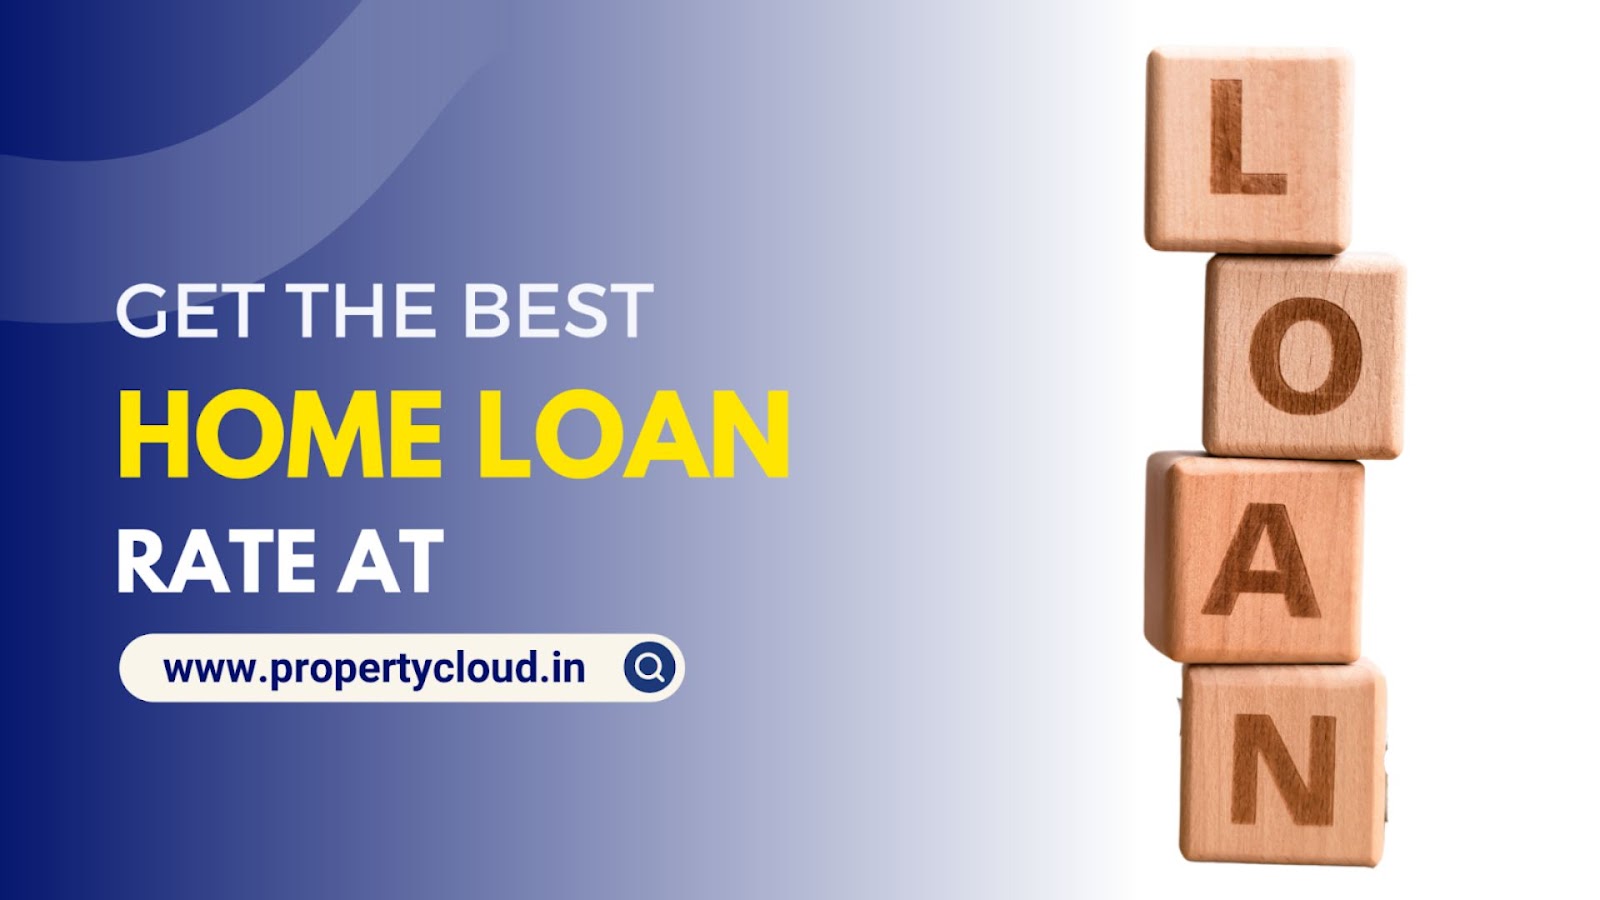 Explore home loan rates at PropertyCloud, linking the process to the aspiration of creating a warm and cozy home